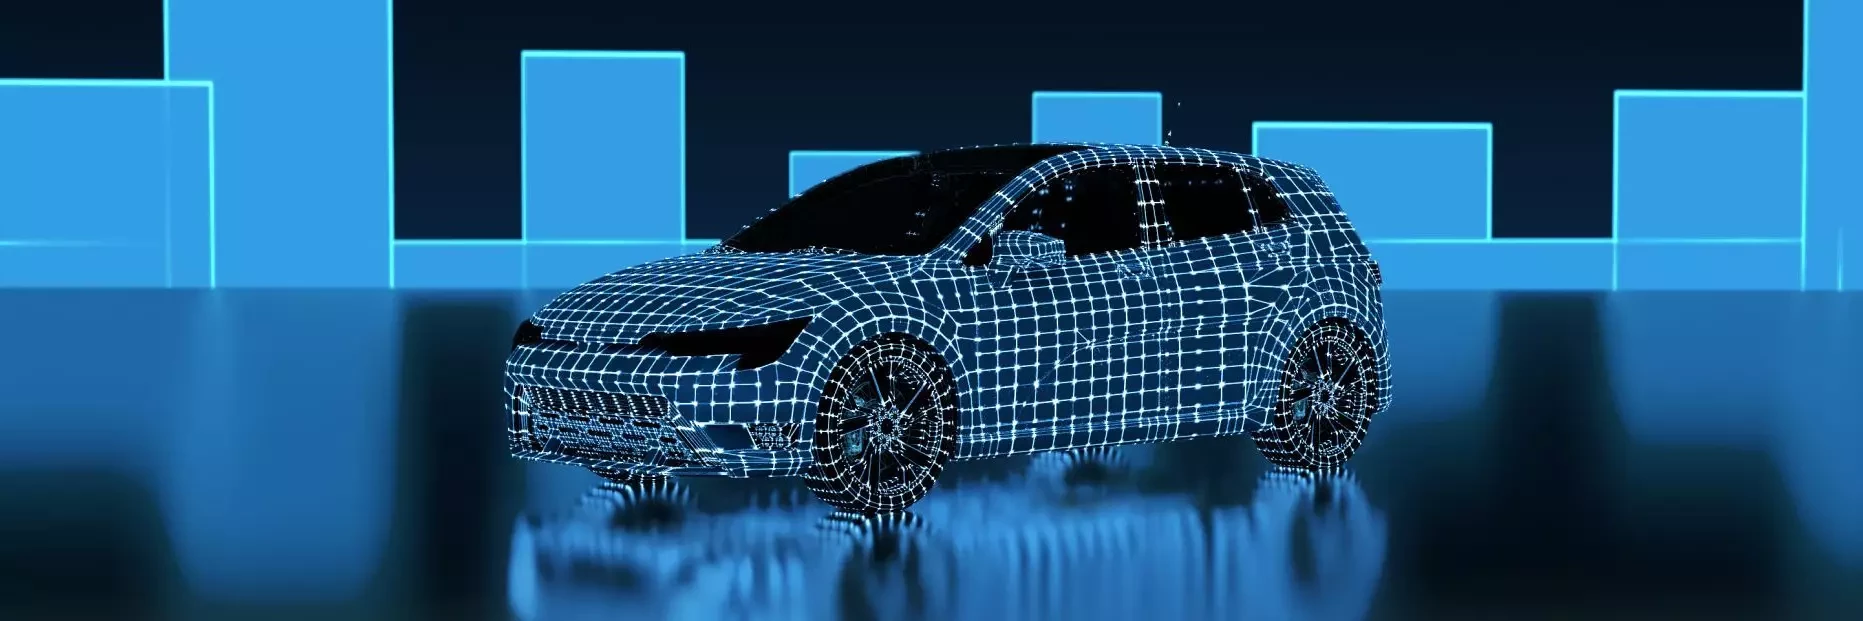 A digitized car represents the automotive sector in which Dürr Consulting offers its services